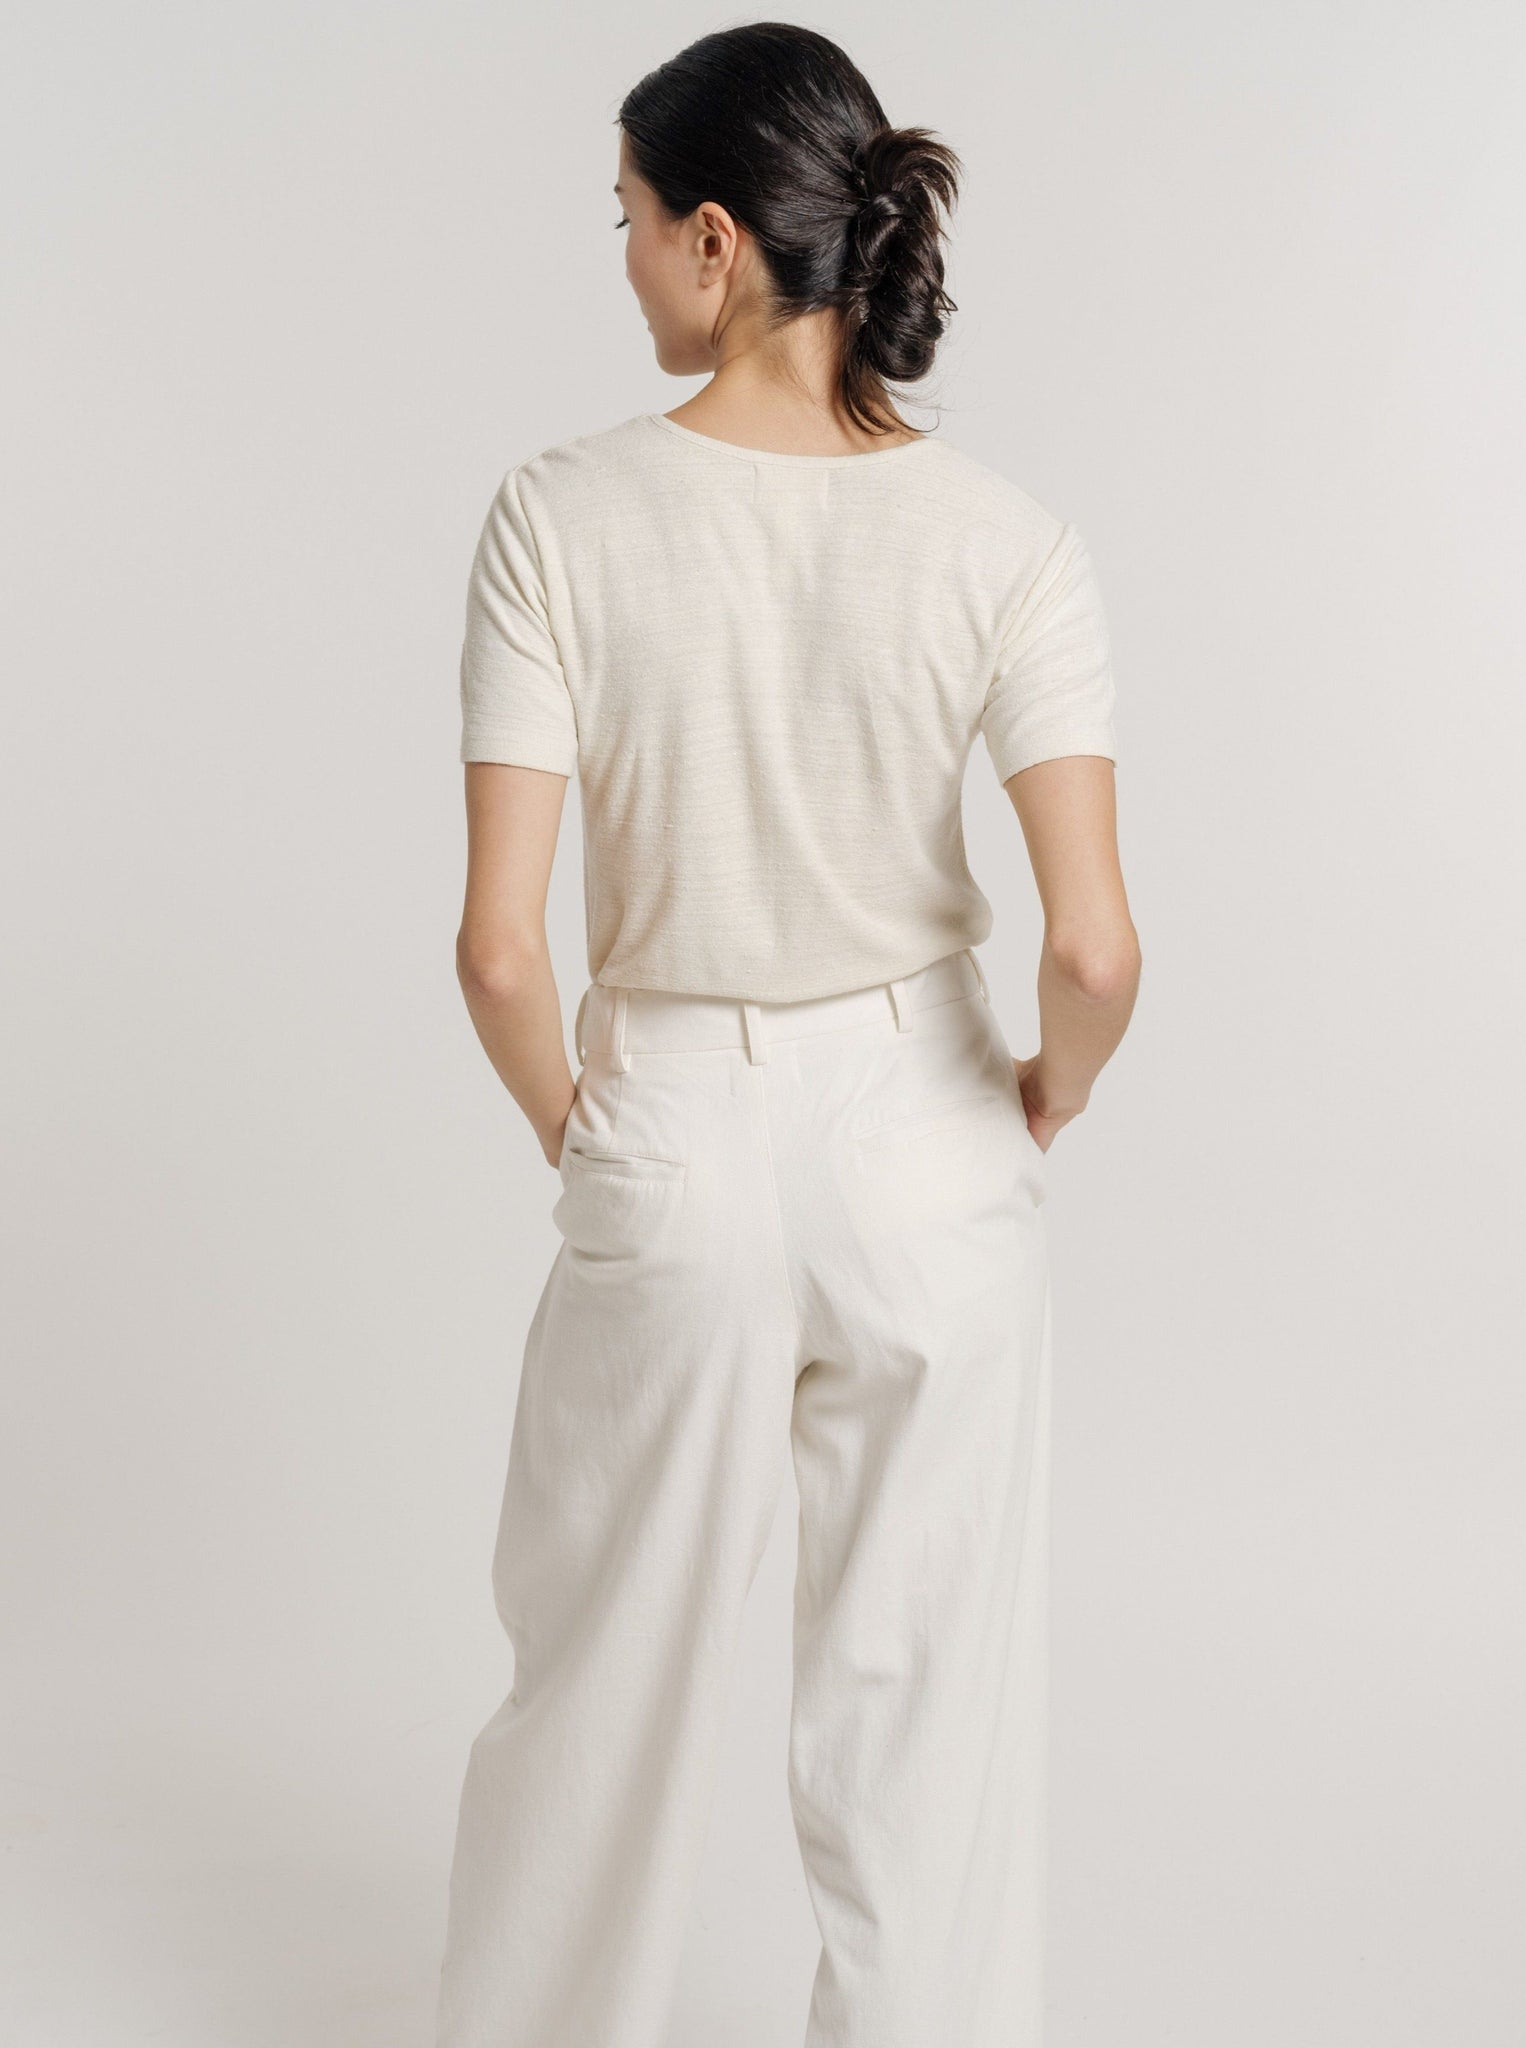 The back view of a woman wearing a Baby Tee - Ivory - pre-order and wide leg pants.